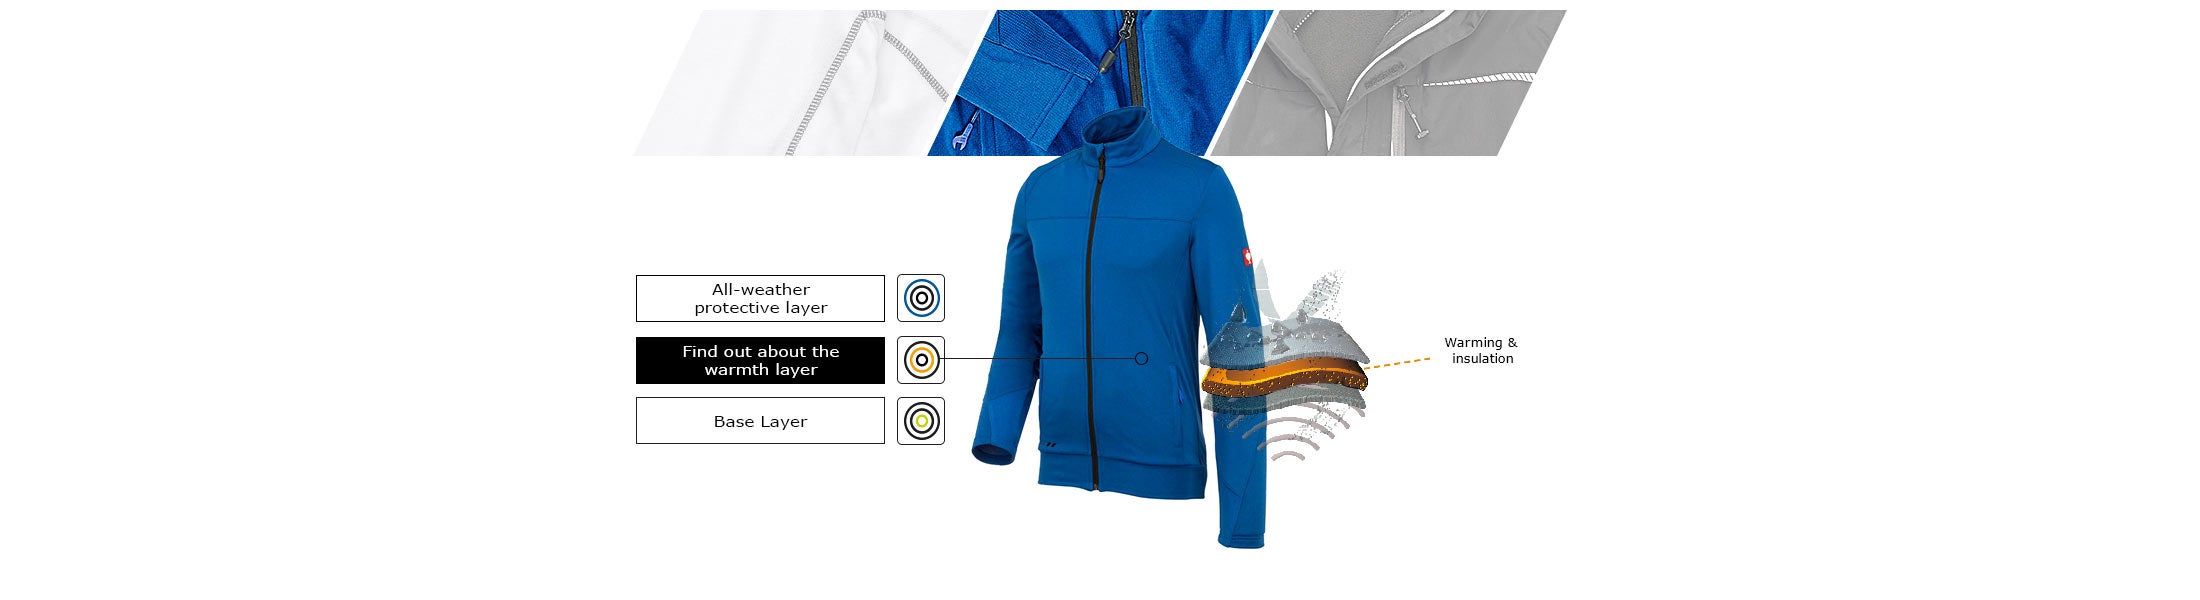 Workwear warmth layer - warmth and insulation